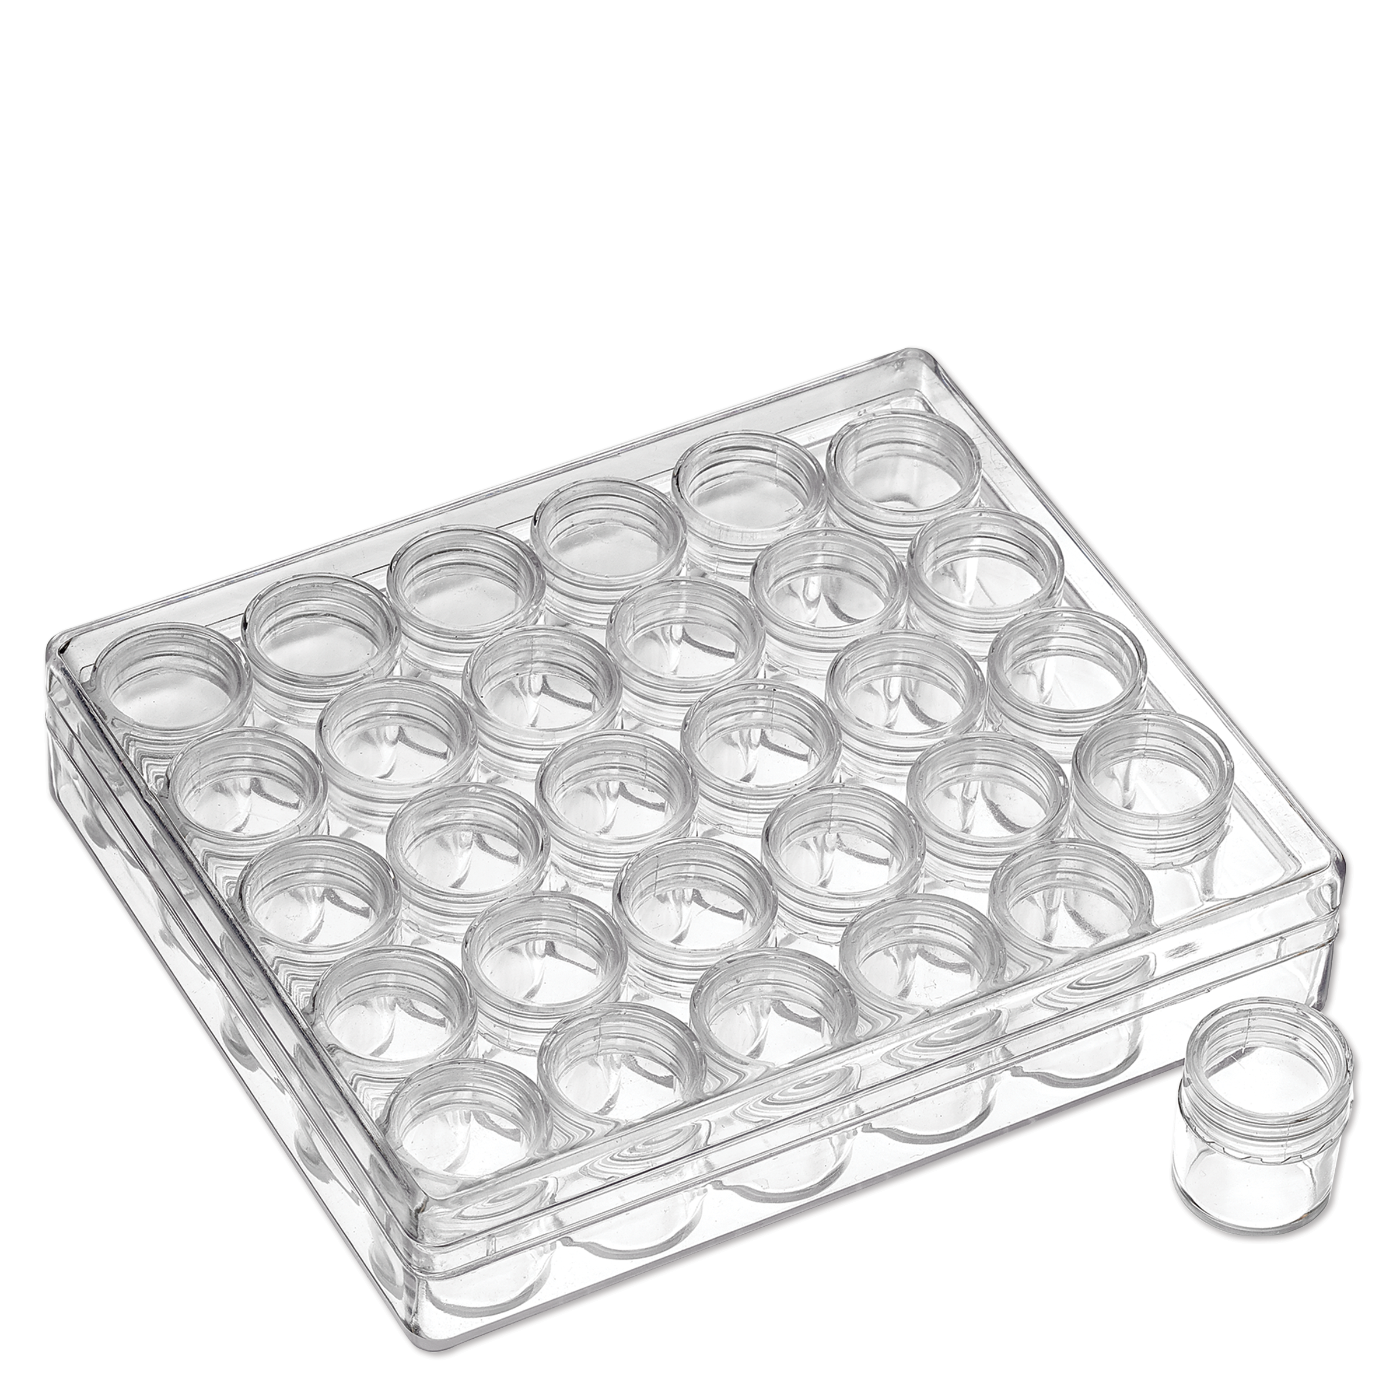 Clear Jars in a Storage Container, 7 mL each